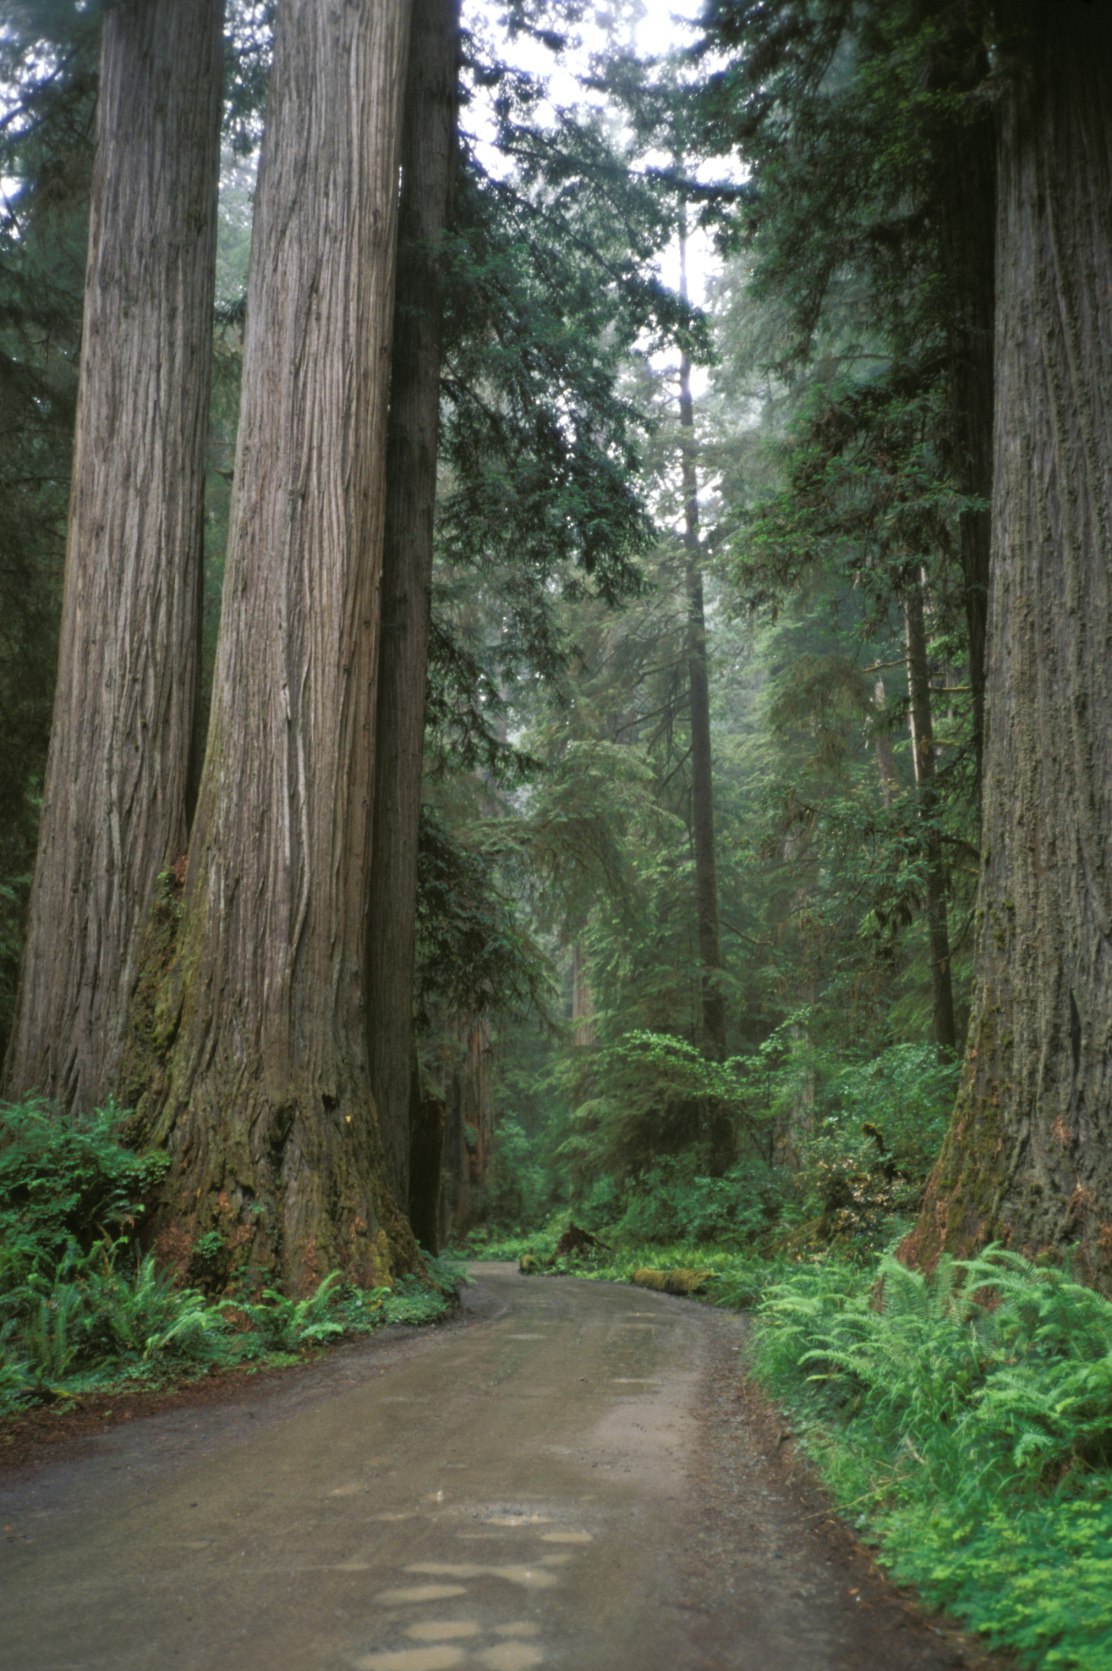 California, Jedediah Smith Redwoods State Park. (Photo by Education Images/UIG via Getty Images)